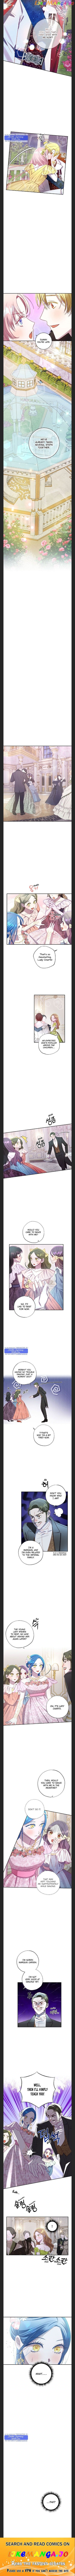 I am Afraid I have Failed to Divorce Chapter 58 page 3